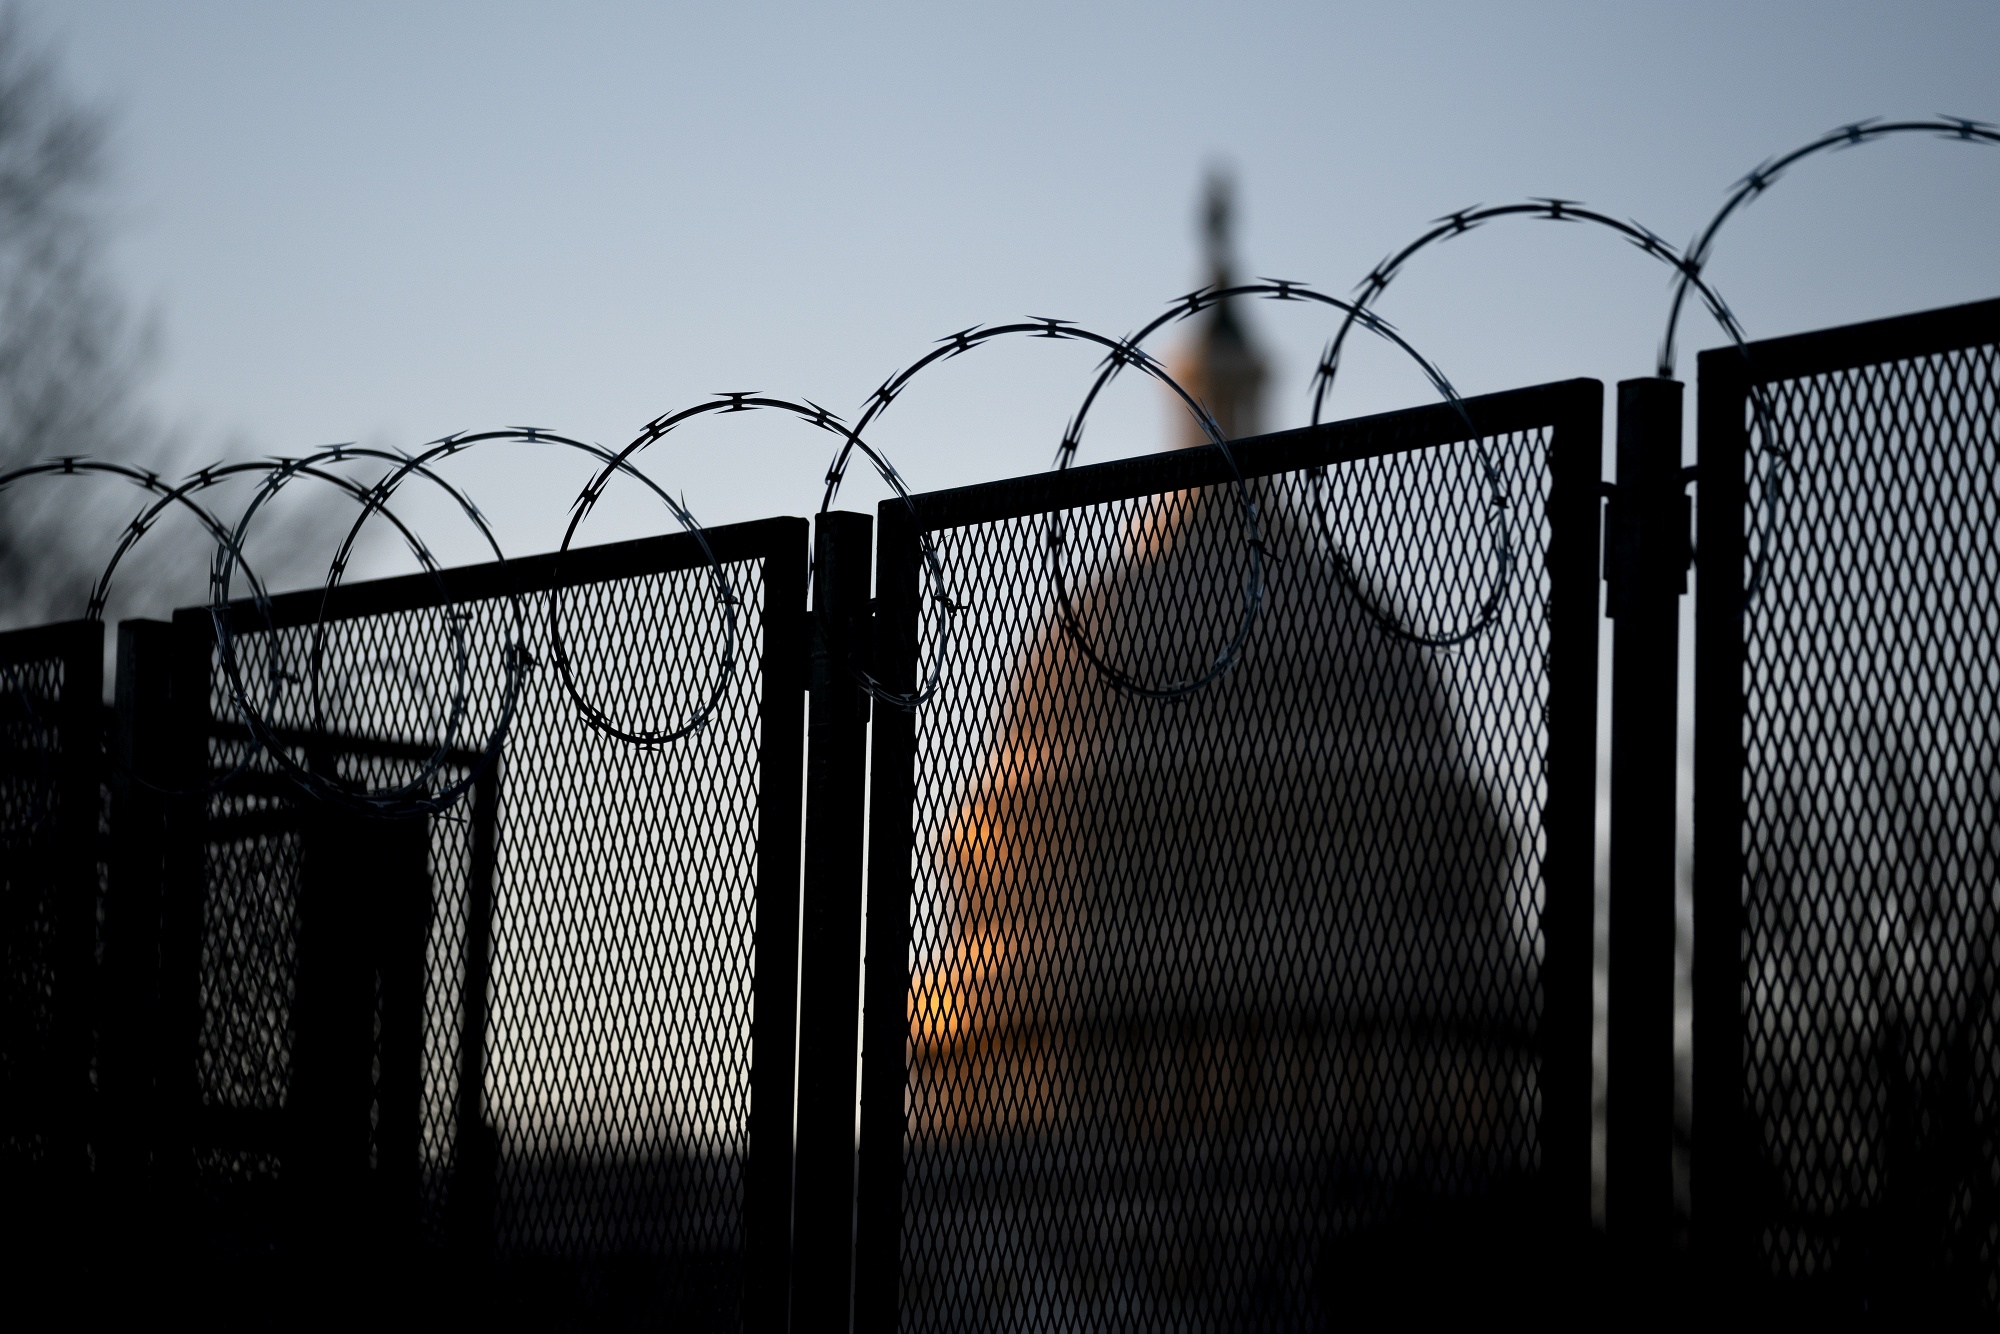 Temporary security fencing topped with razor wire outside the U.S. Capitol&nbsp;on March 3.&nbsp;